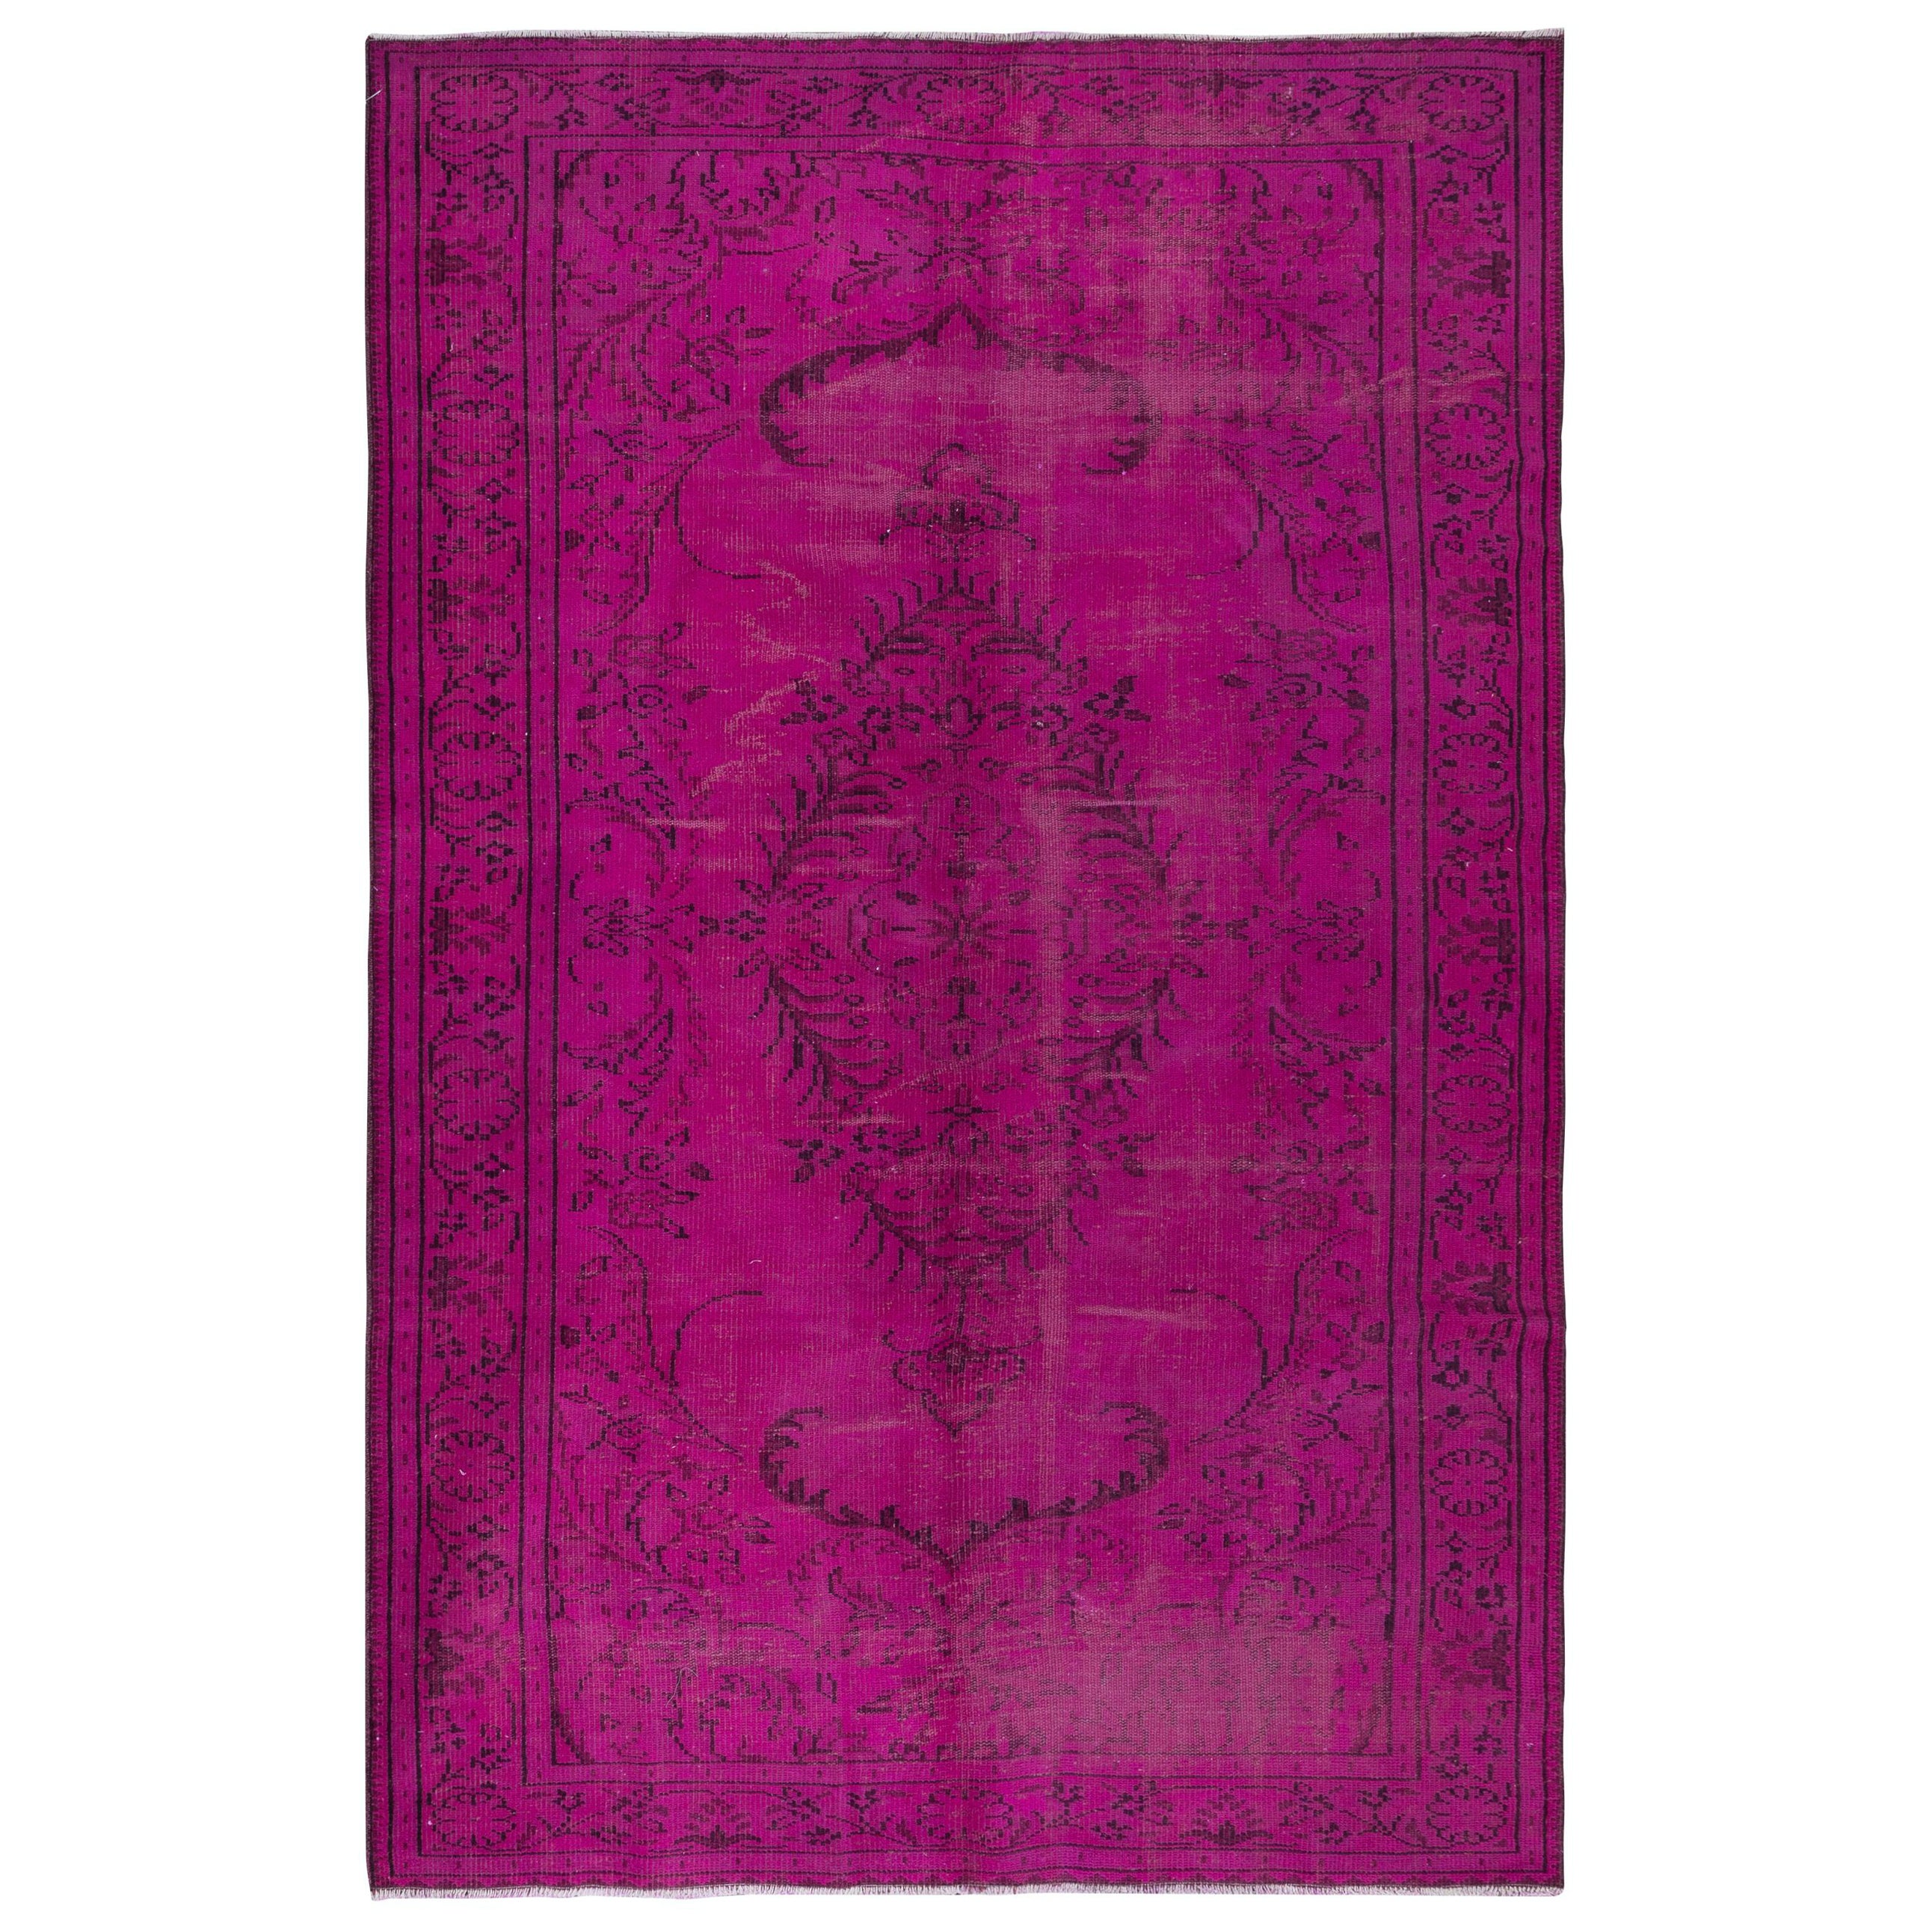 6x9.2 Ft Modern & Contemporary Rug in Pink, Handmade Turkish Wool Carpet For Sale